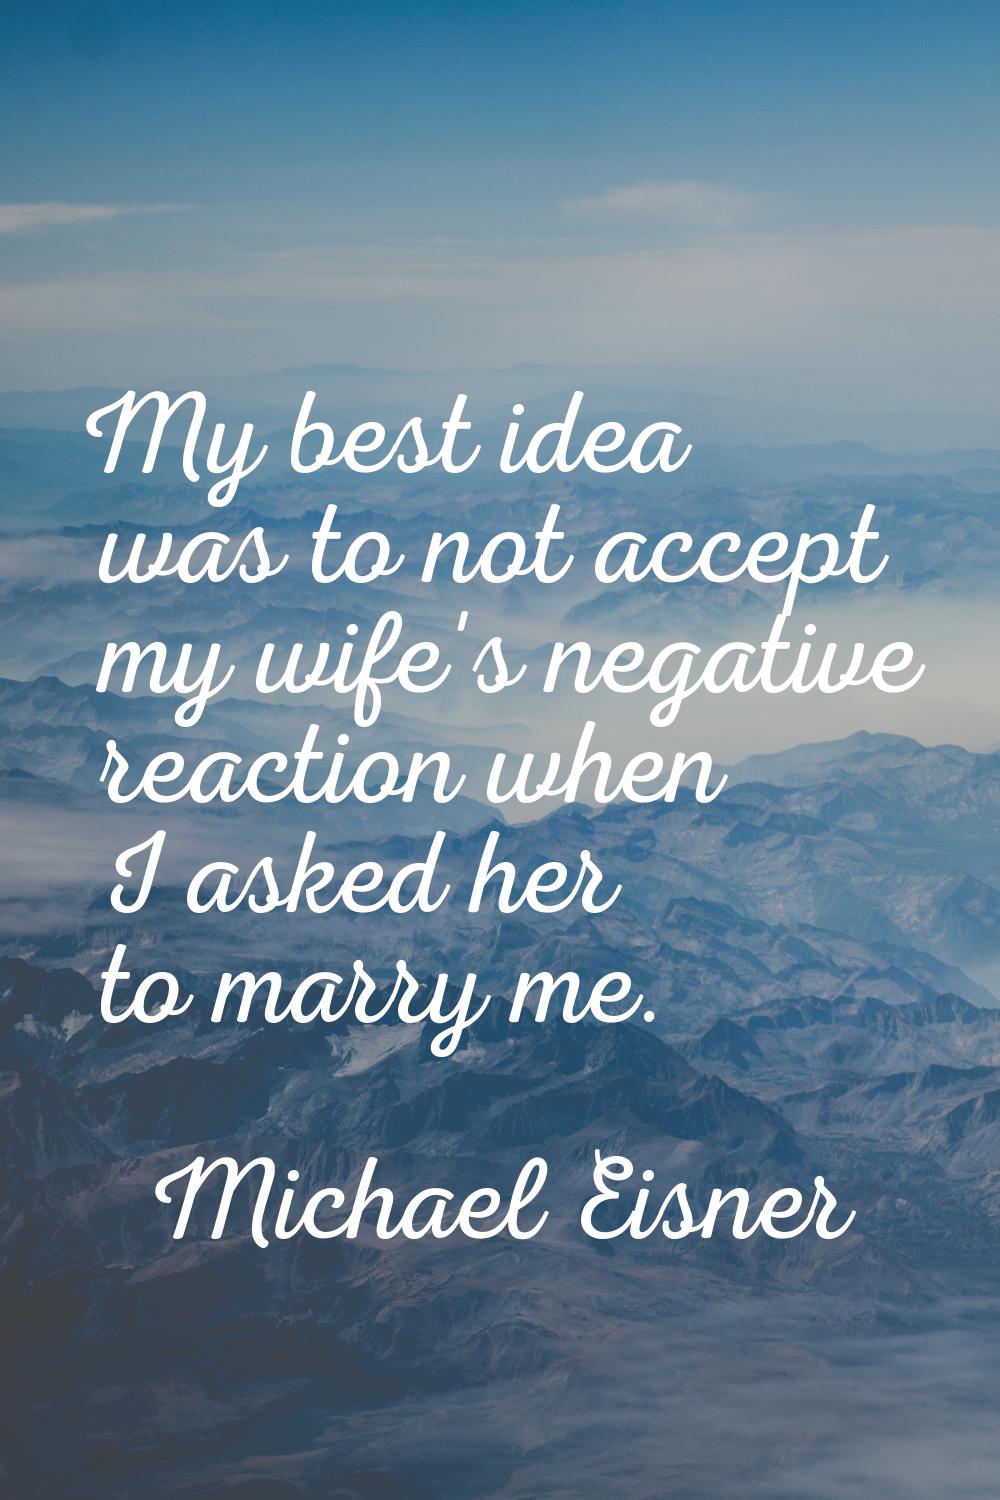 My best idea was to not accept my wife's negative reaction when I asked her to marry me.